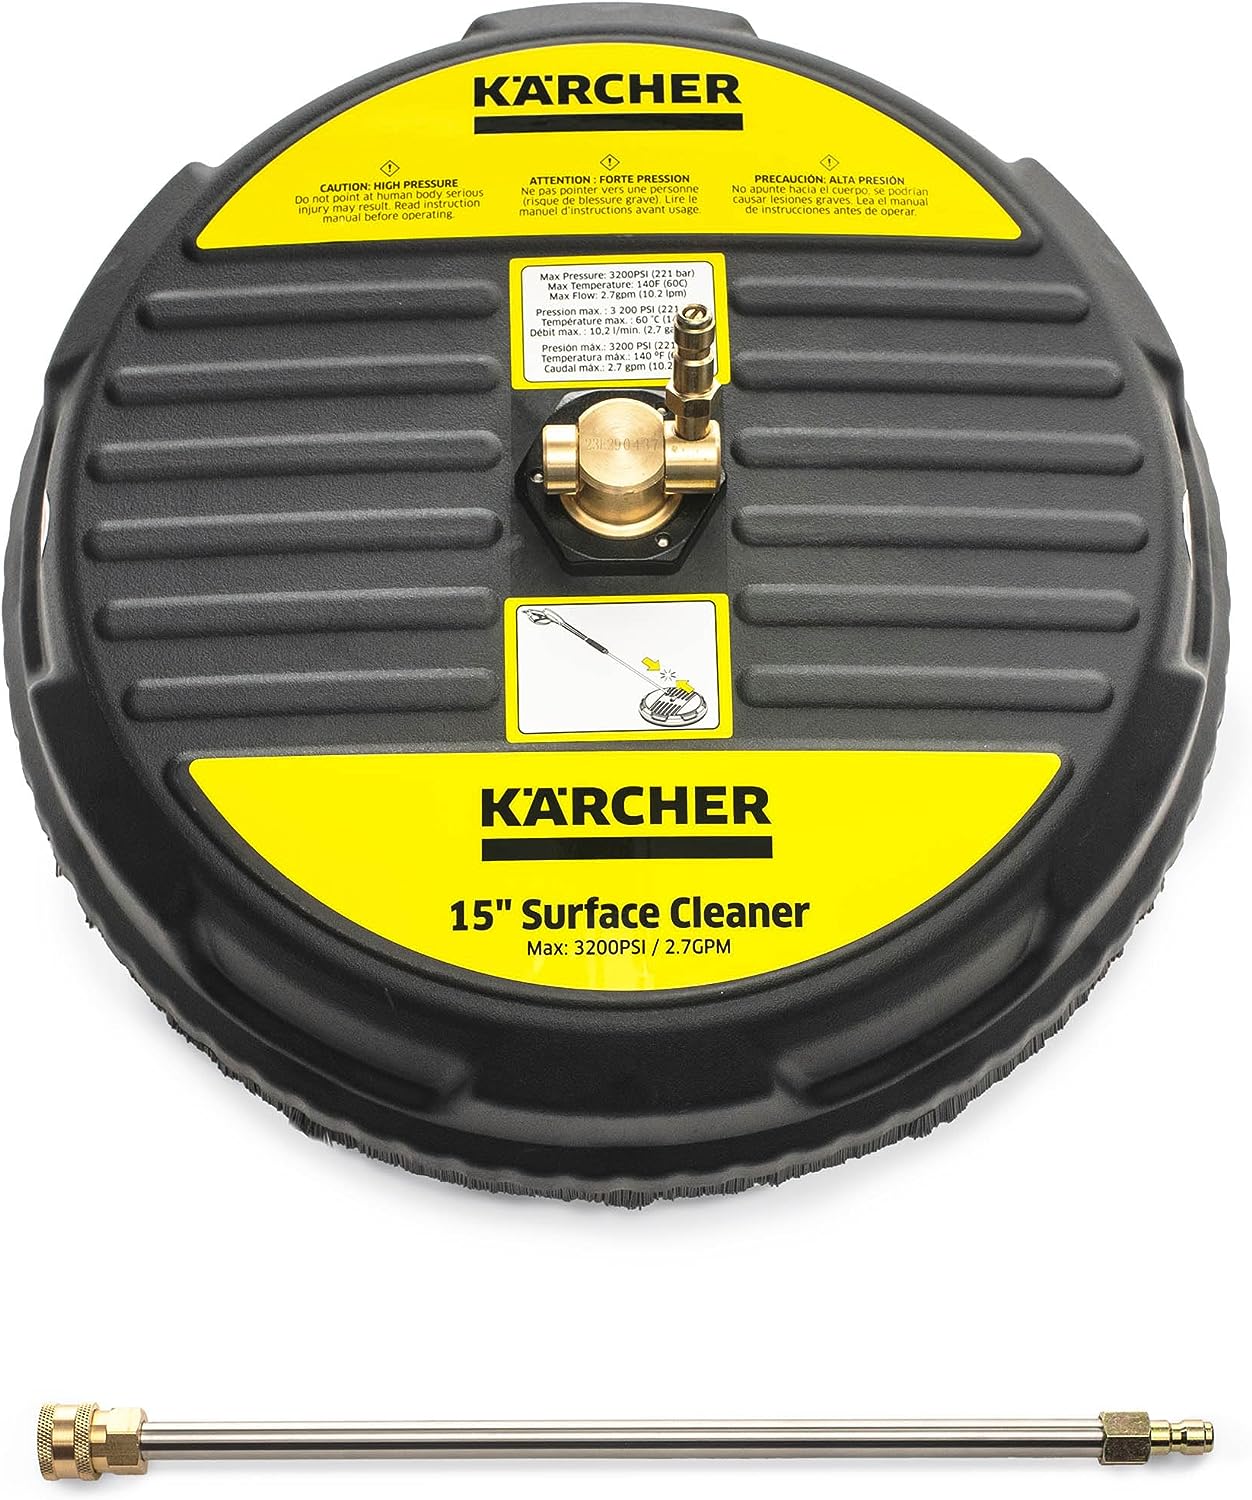 Limited-time deal: Kärcher - 3200 PSI Universal Surface Cleaner Attachment for Pressure Washers - 15" and 1/4 Quick Connect - 2 Spinning Nozzles and Extension Wand - $47 @ Amazon